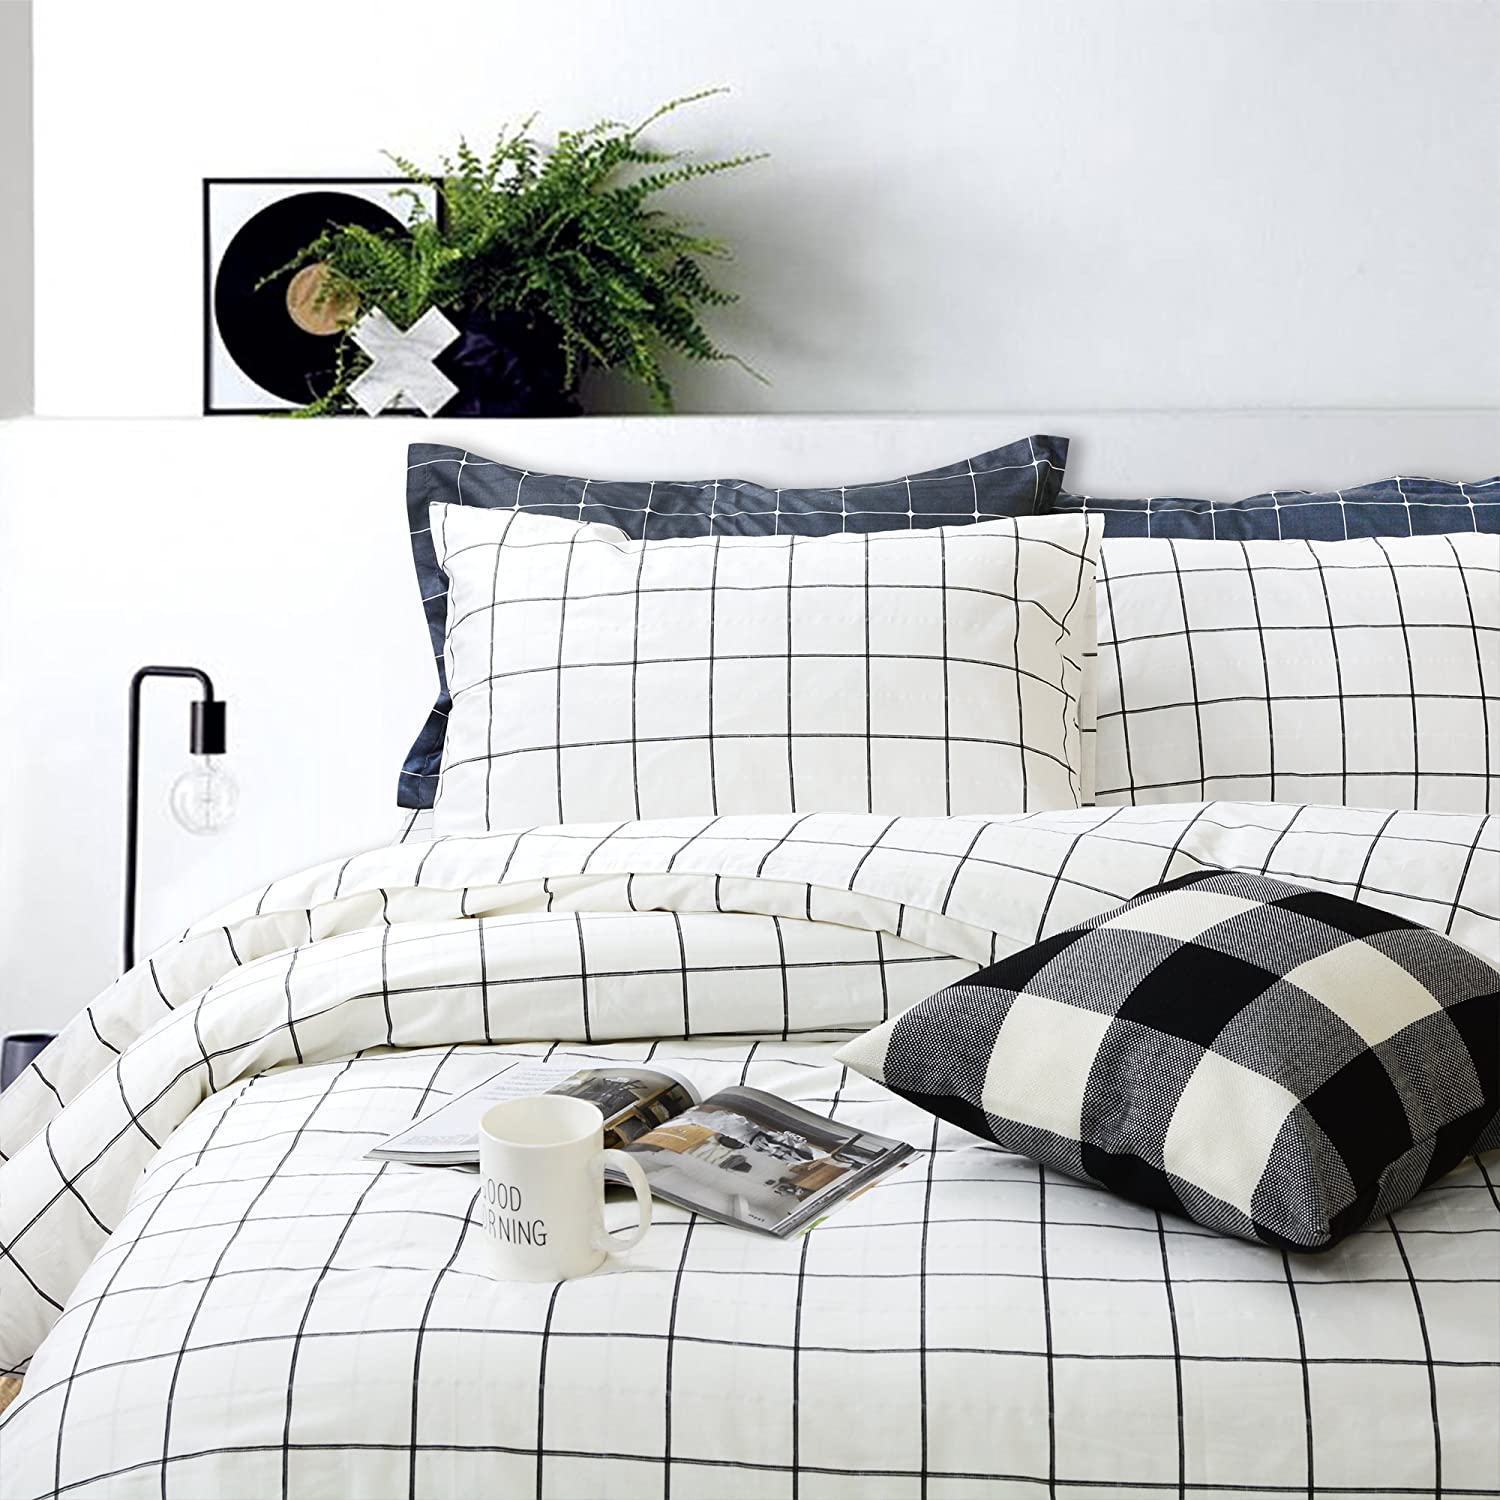 Do you like black and white duvet covers?